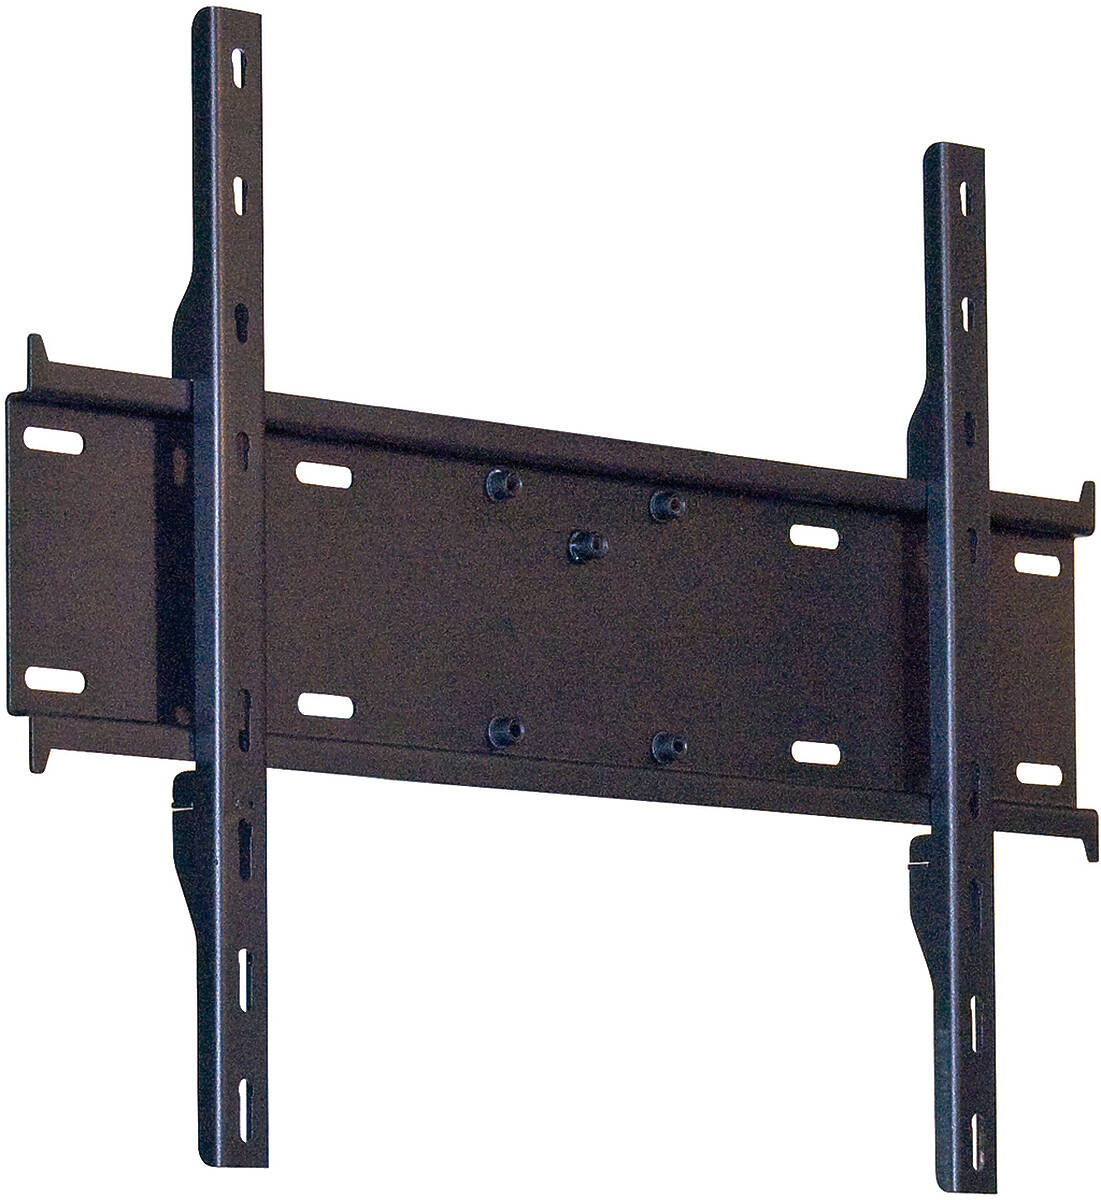 Unicol VZXW1 Versus thin flat wall mount for monitors and TVs from 33-57" product image. Click to enlarge.